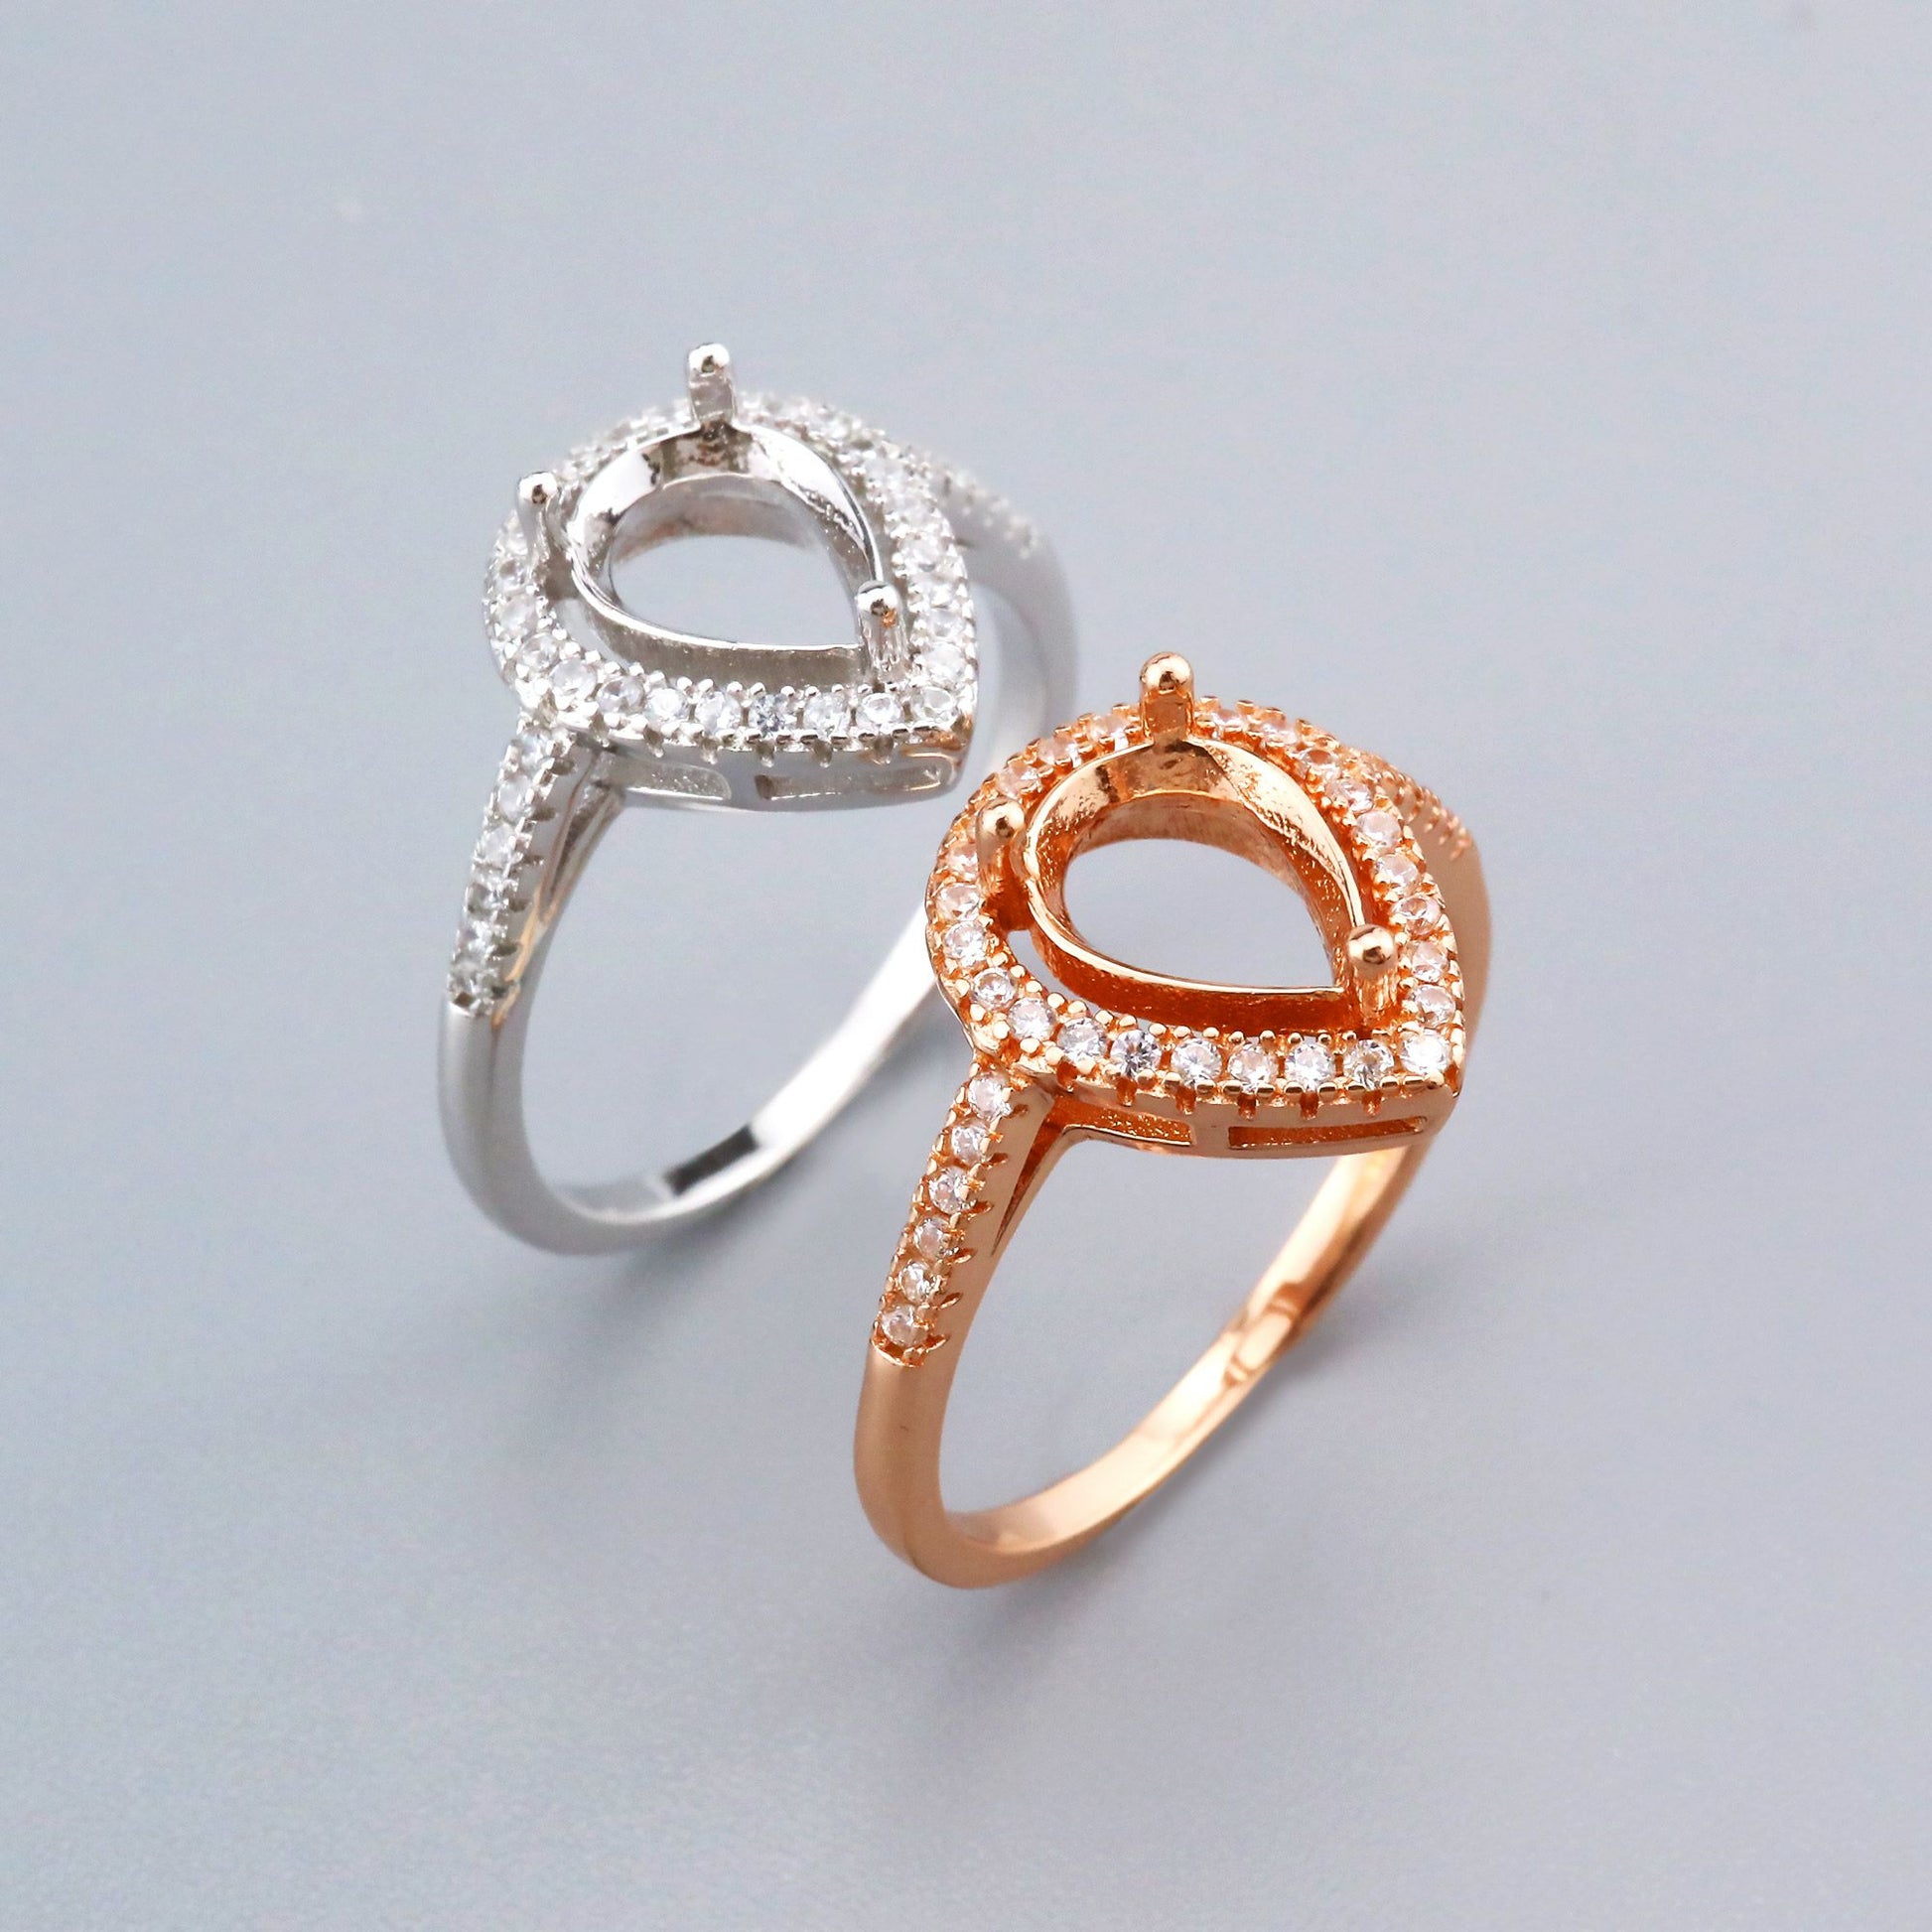 One silver and one rose gold tear drop shaped halo semi mount settings.